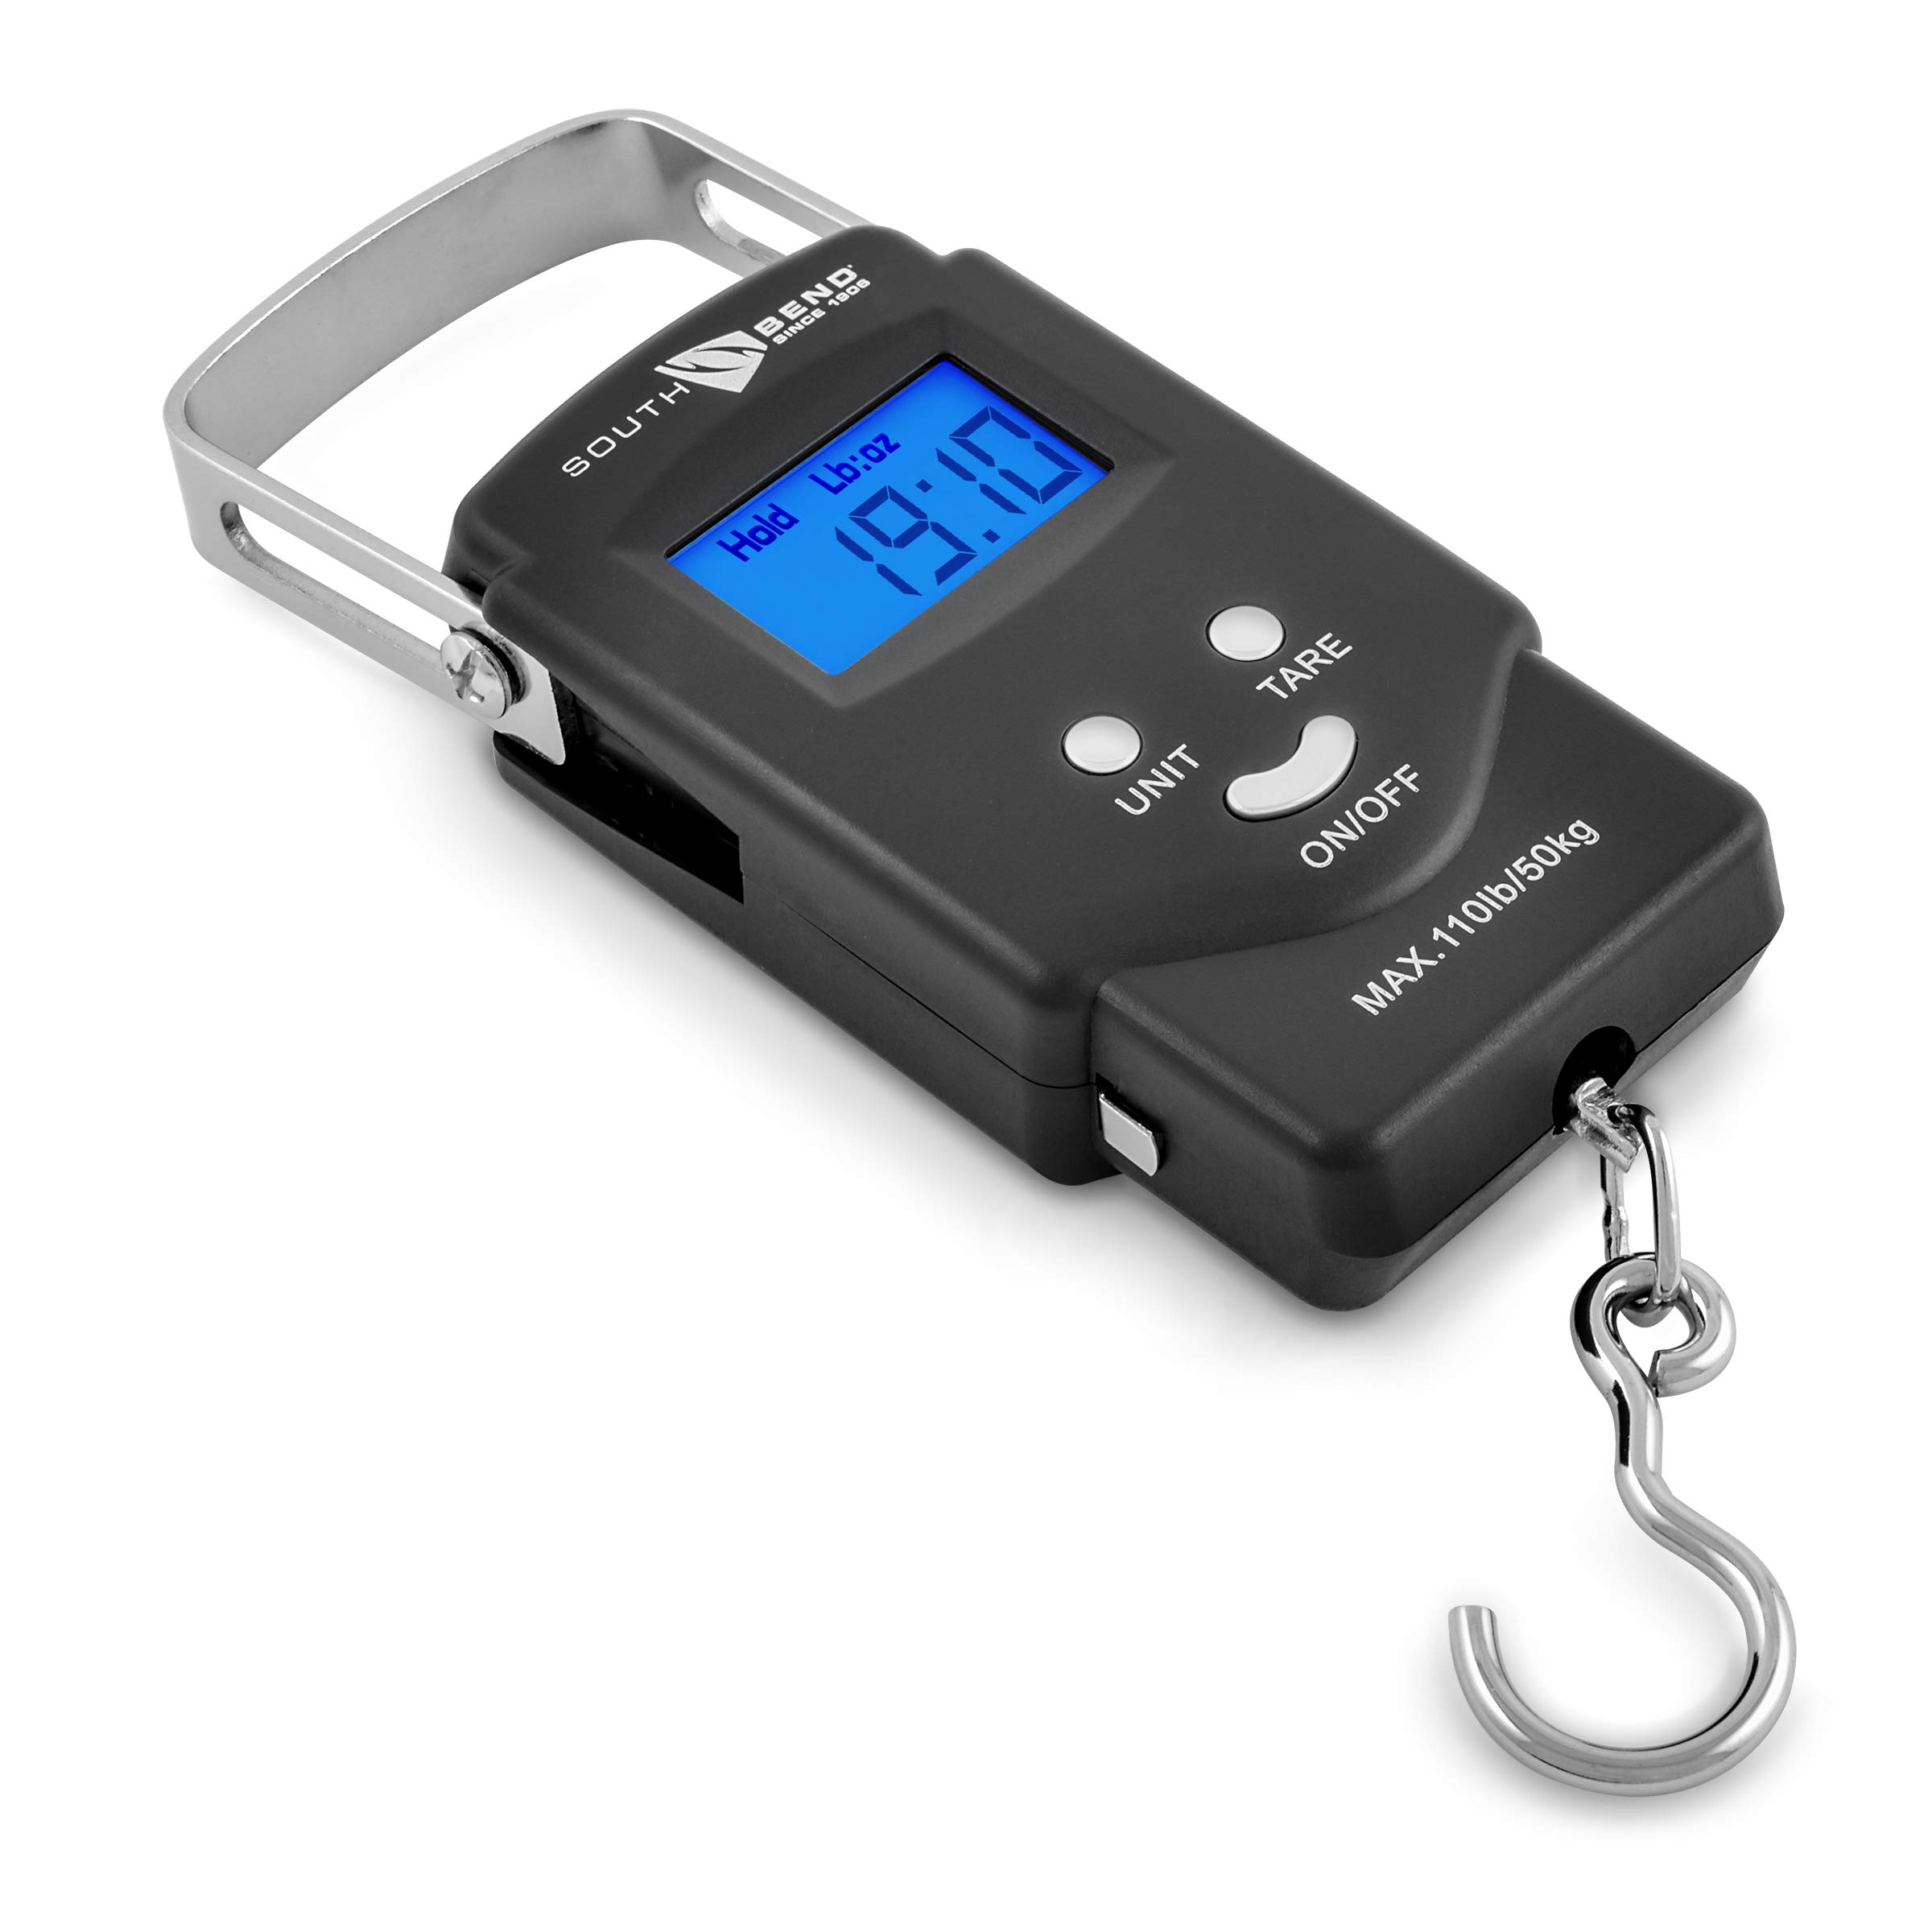 South Bend Digital Hanging Fishing Scale and Tape Measure with Backlit LCD  Display, 110lb/50kg Weight